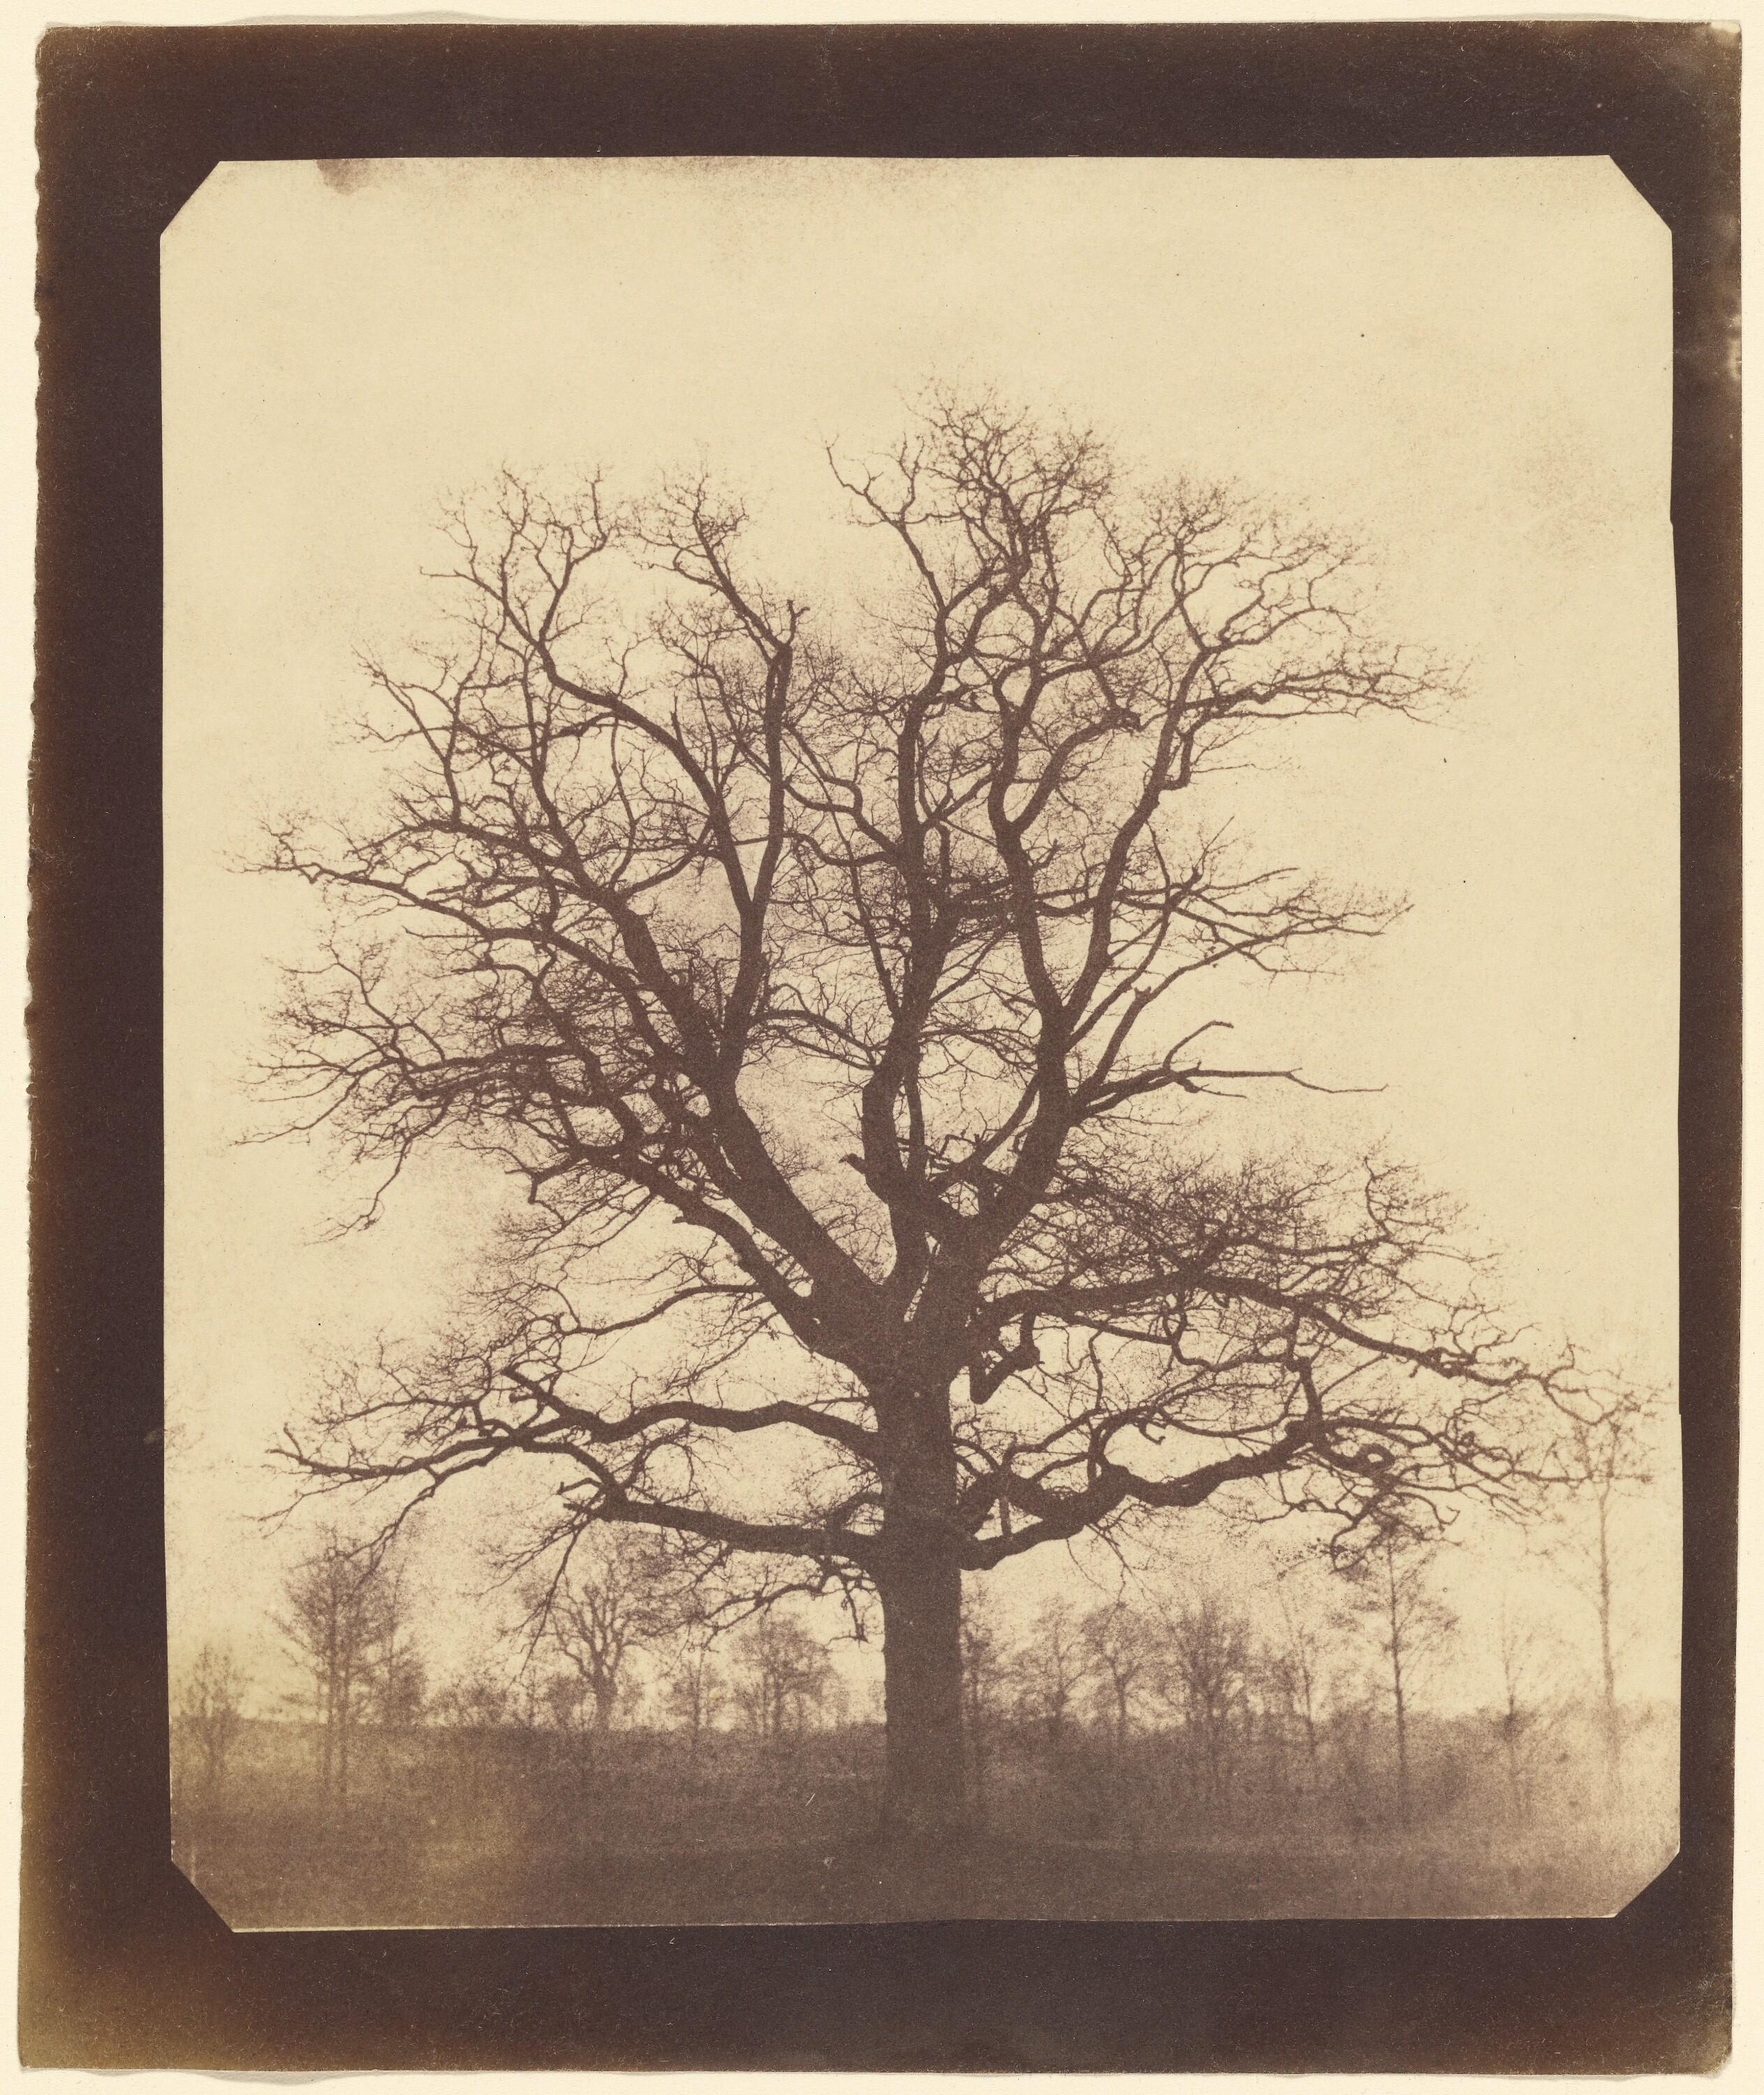 William Henry Fox Talbot, Oak Tree in Winter. Left: Calotype, c. 1842–43; and Right: salted paper print, c. 1892–93